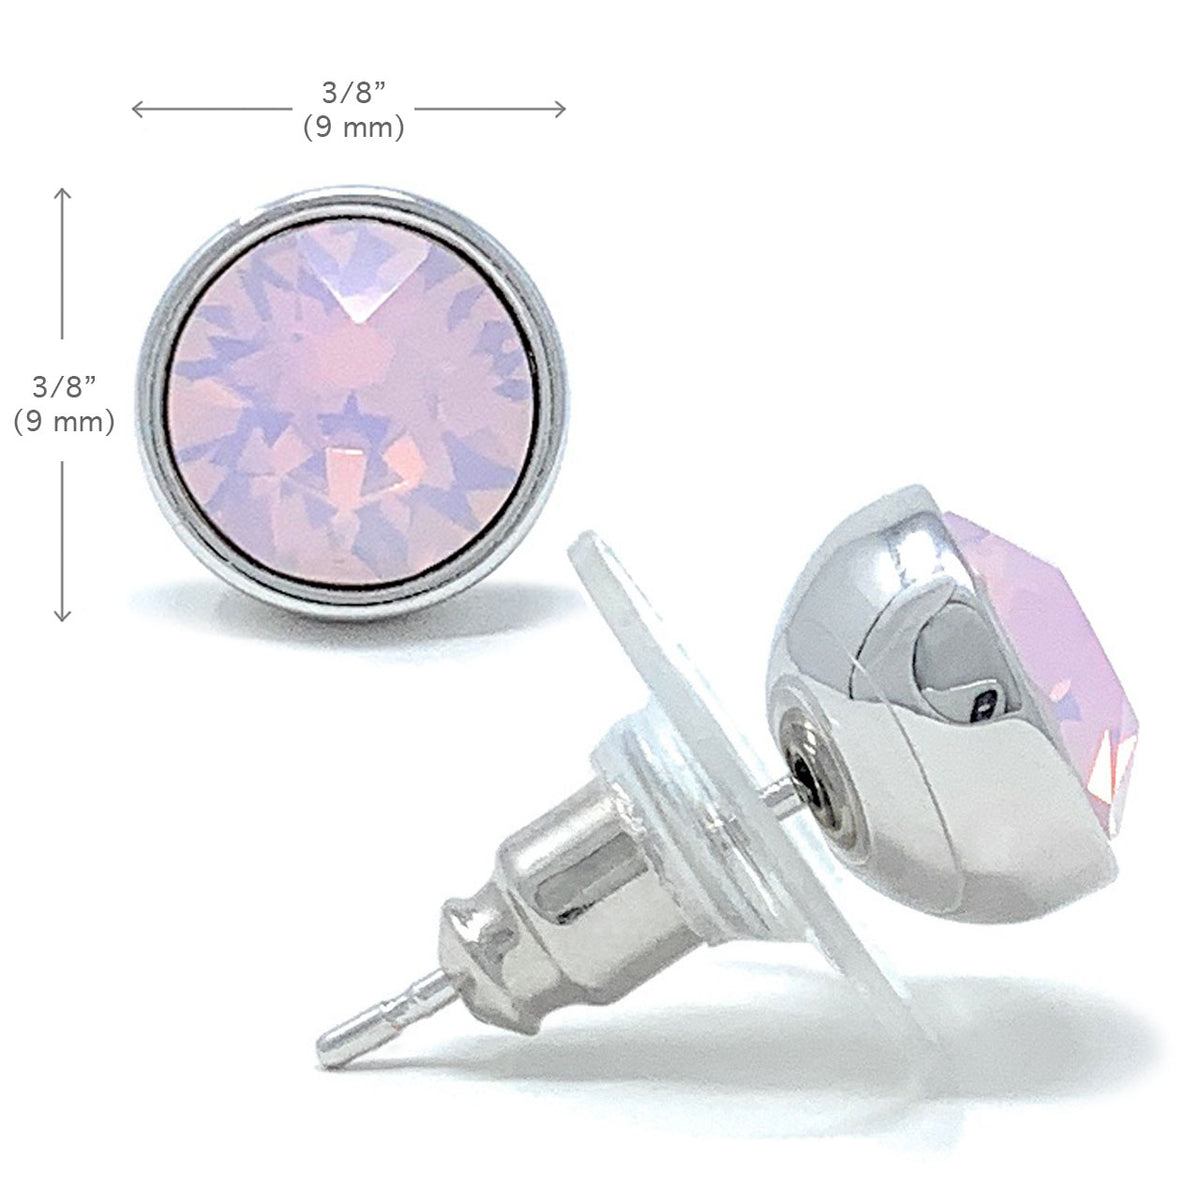 Harley Stud Earrings with Pink Rose Water Round Opals from Swarovski Silver Toned Rhodium Plated - Ed Heart